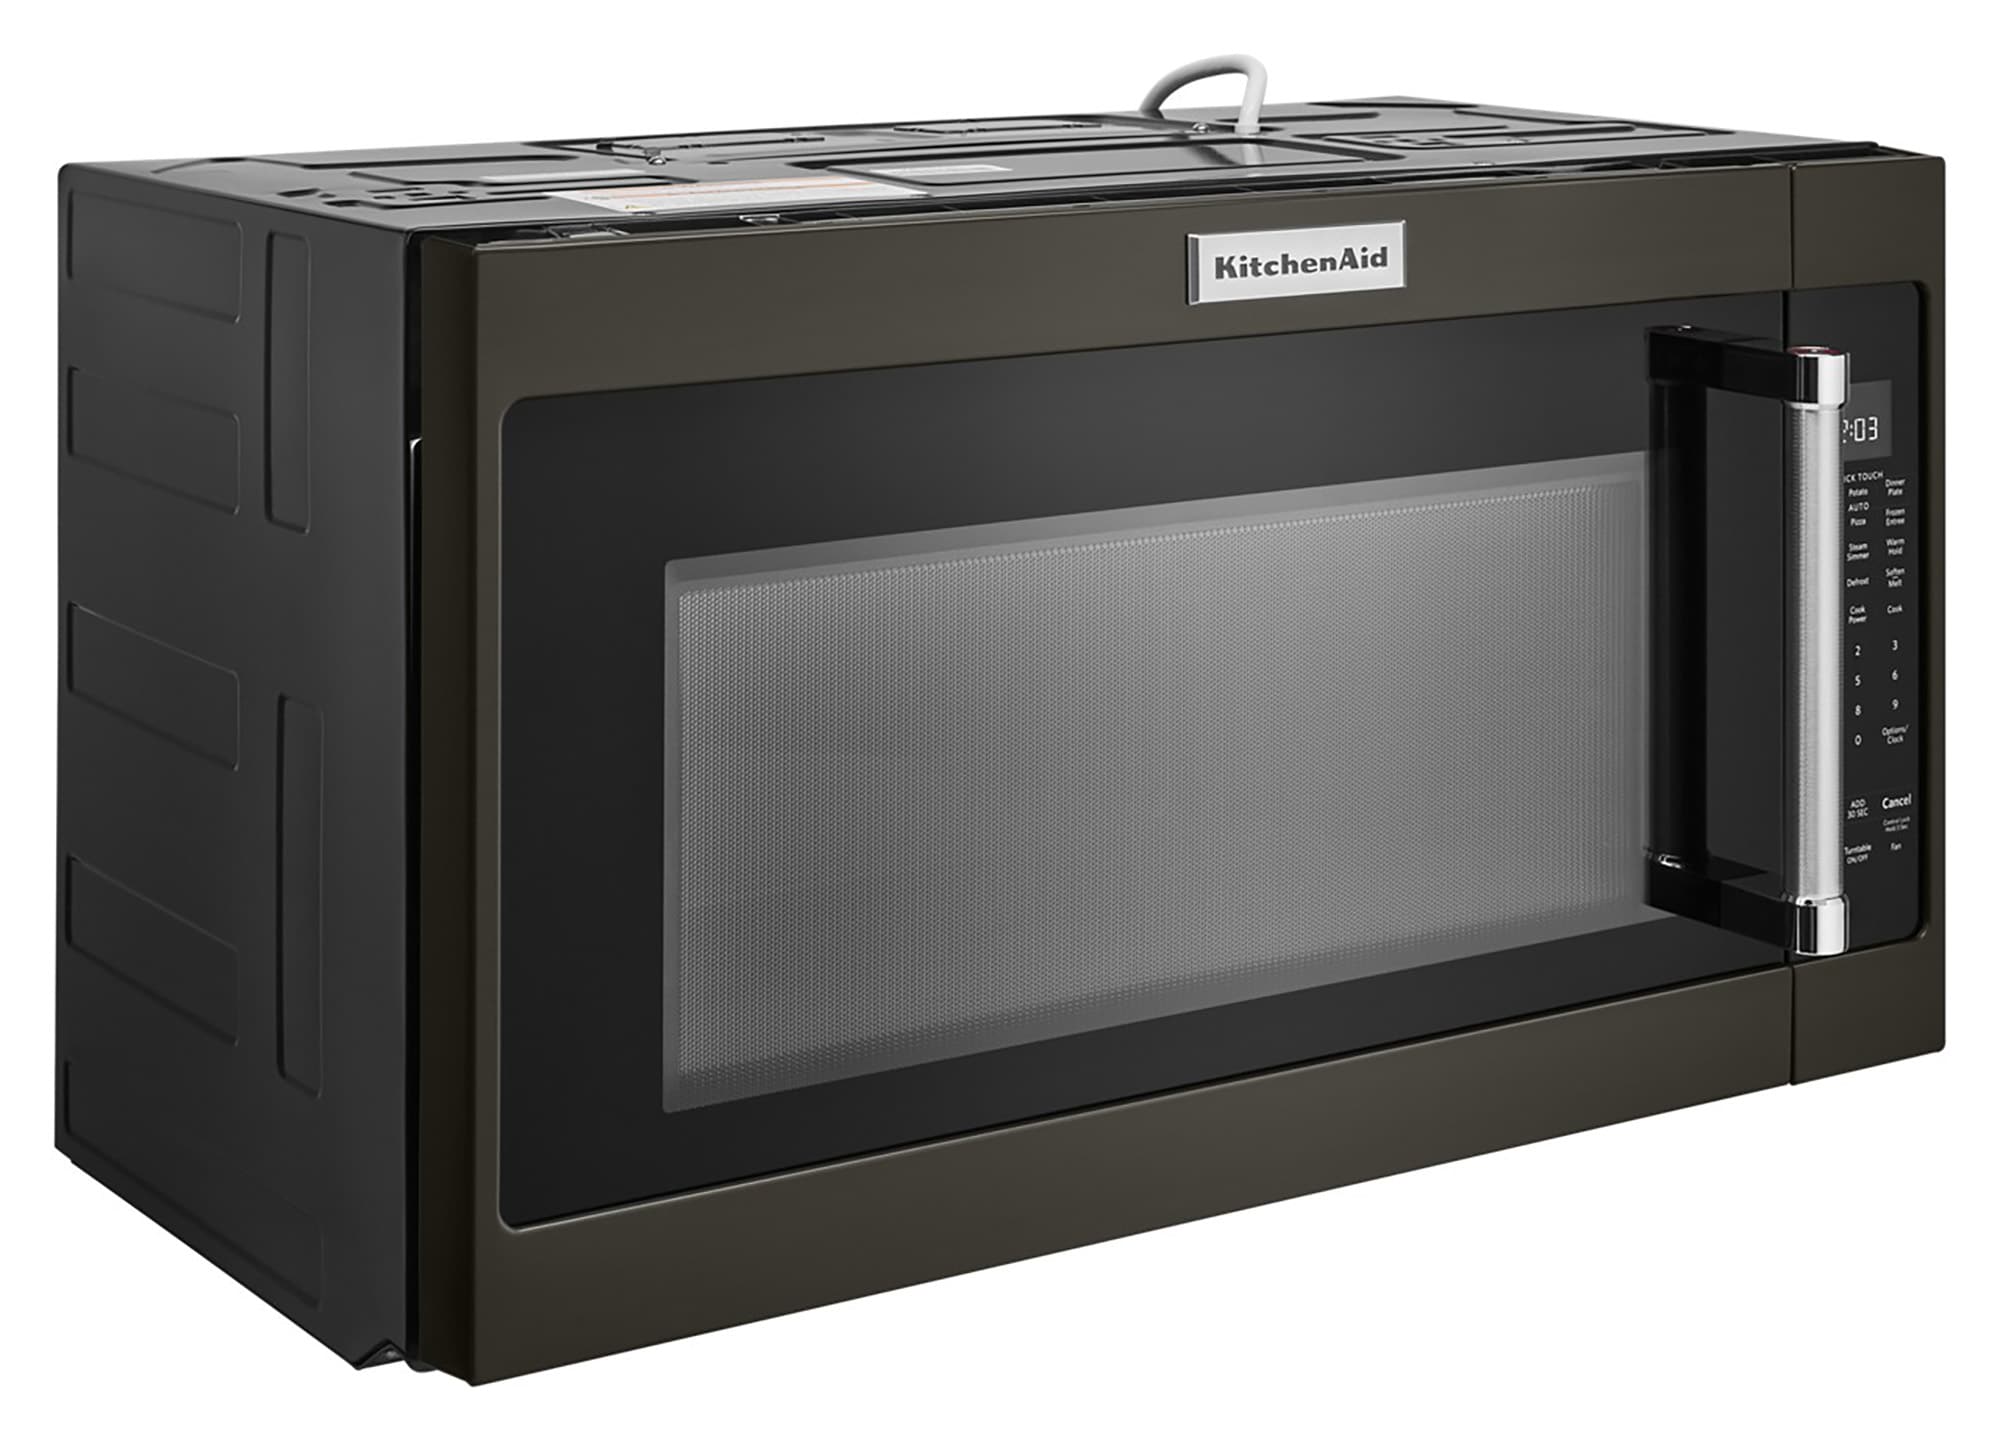 Collapsible Microwave Cover - Black - Bed Bath & Beyond - 36965986